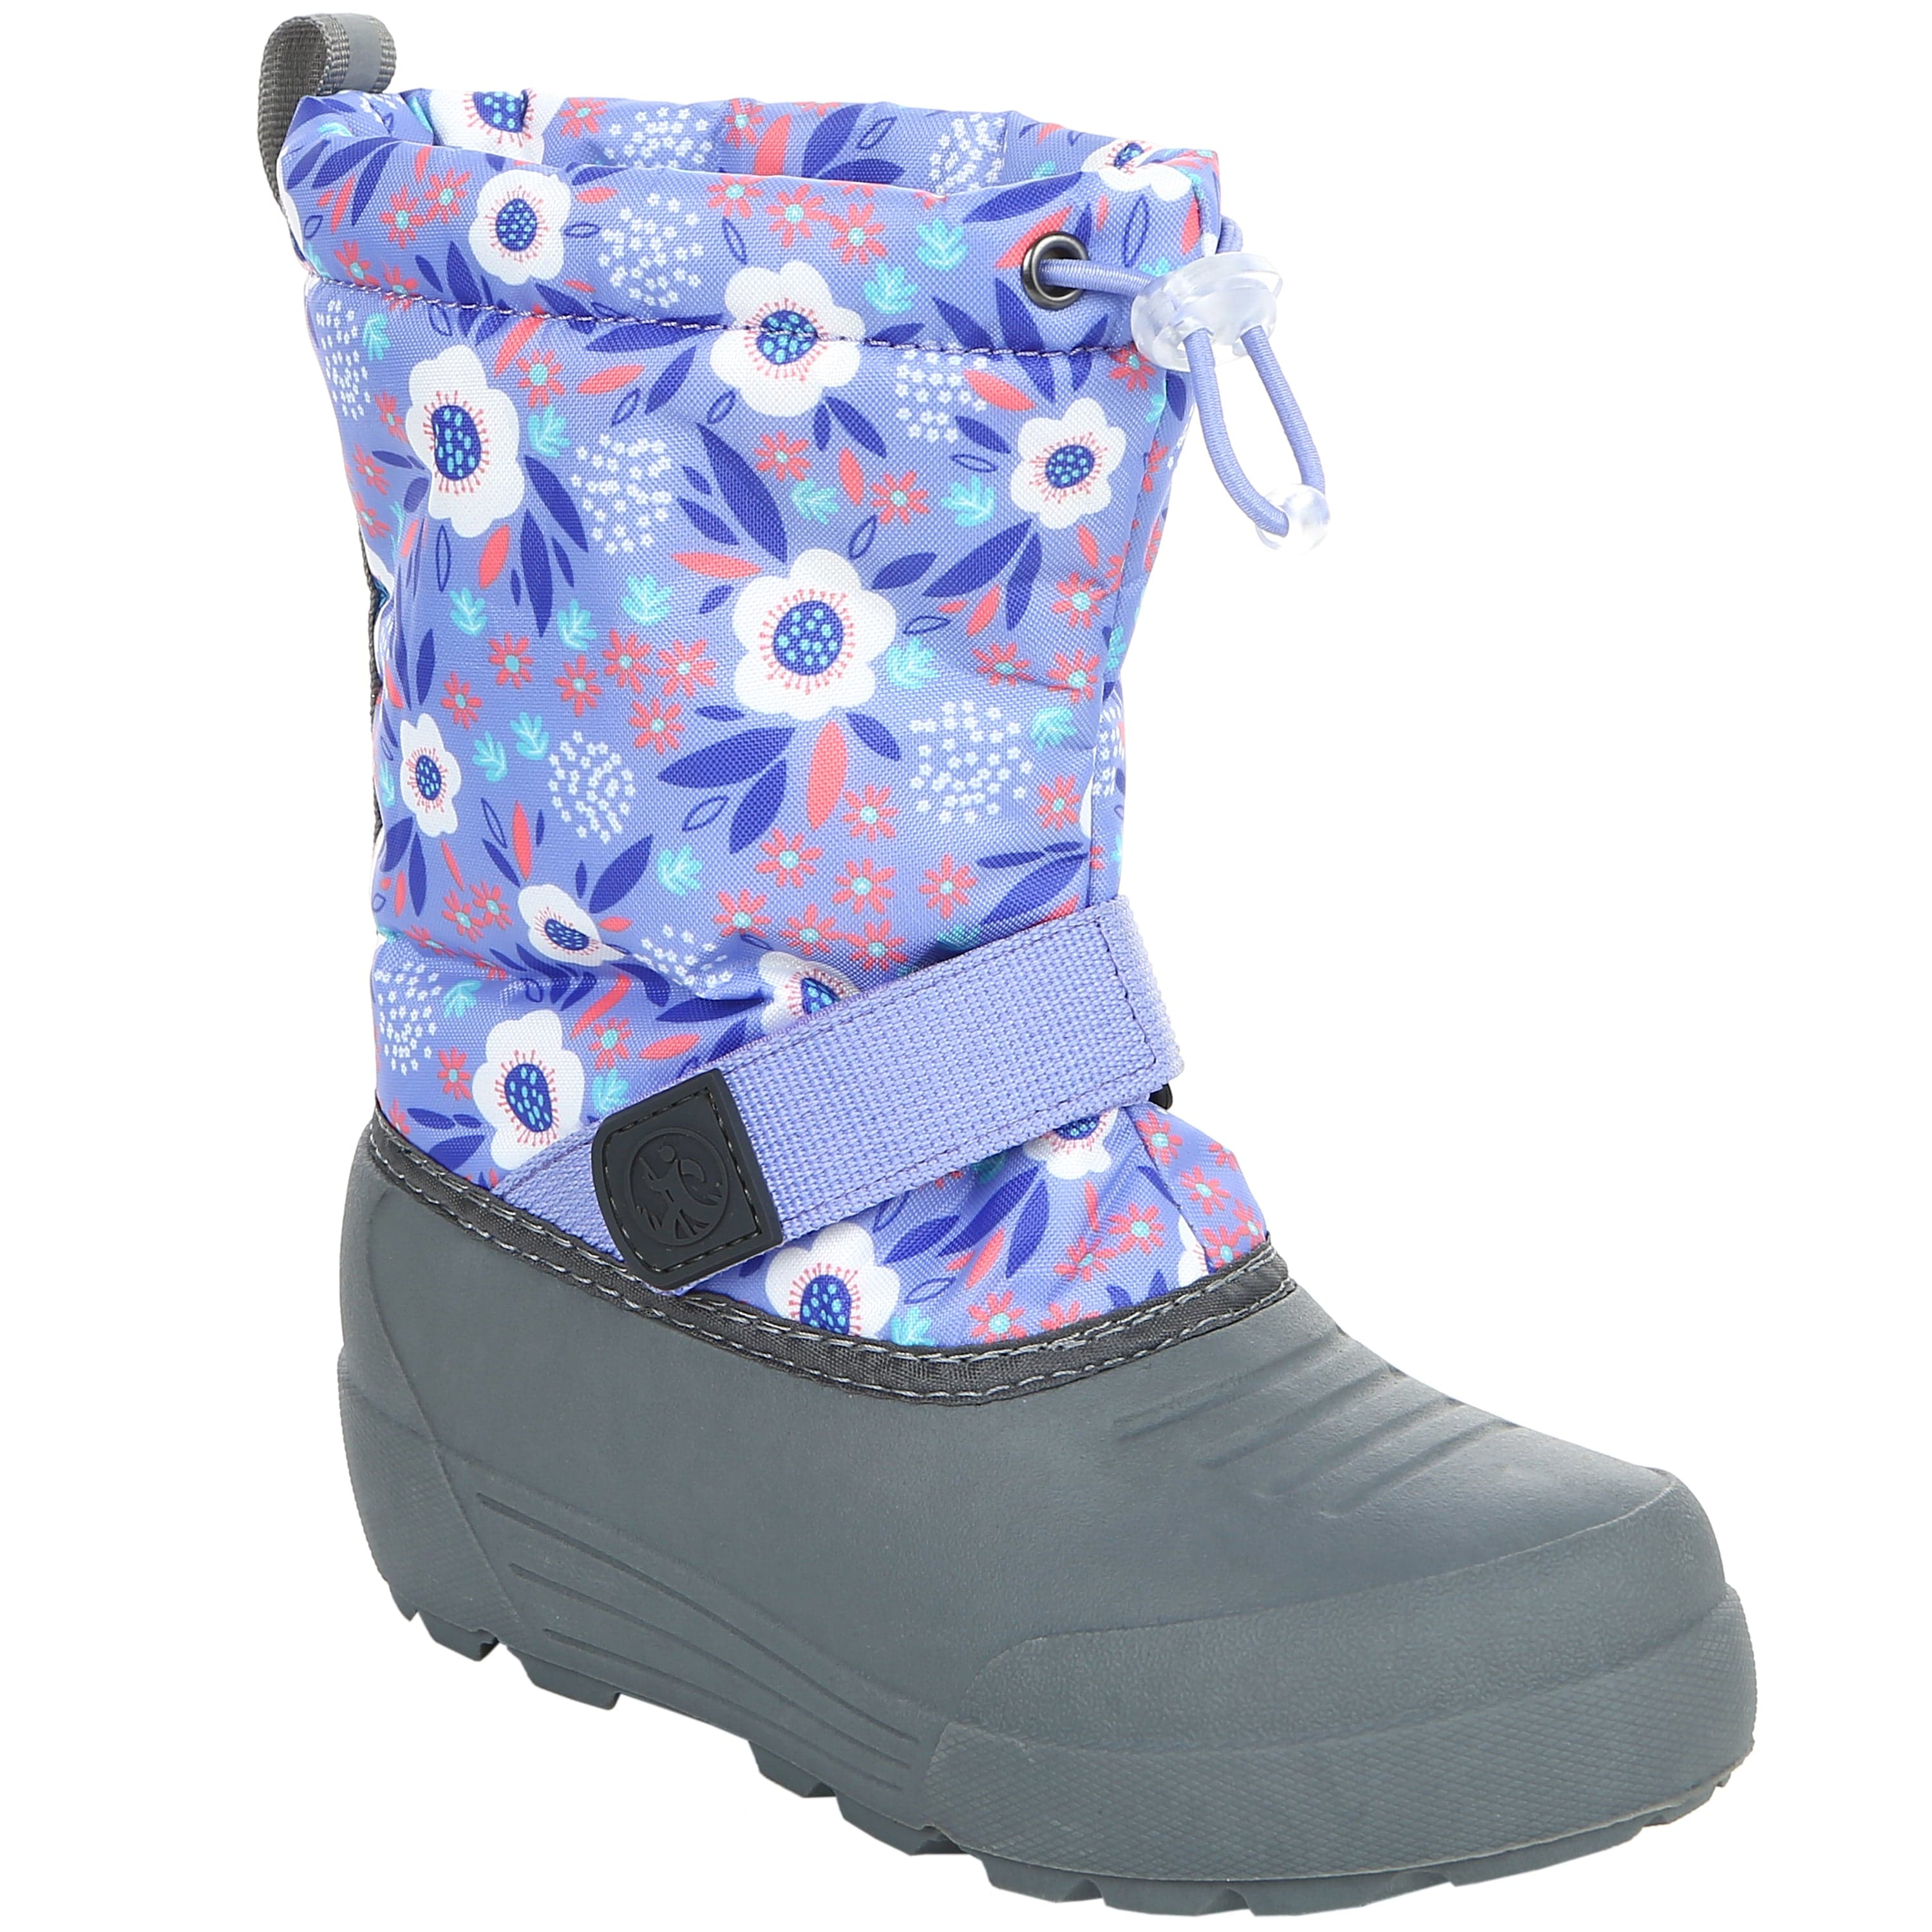 Snow Boots for Men, Womens, Kids